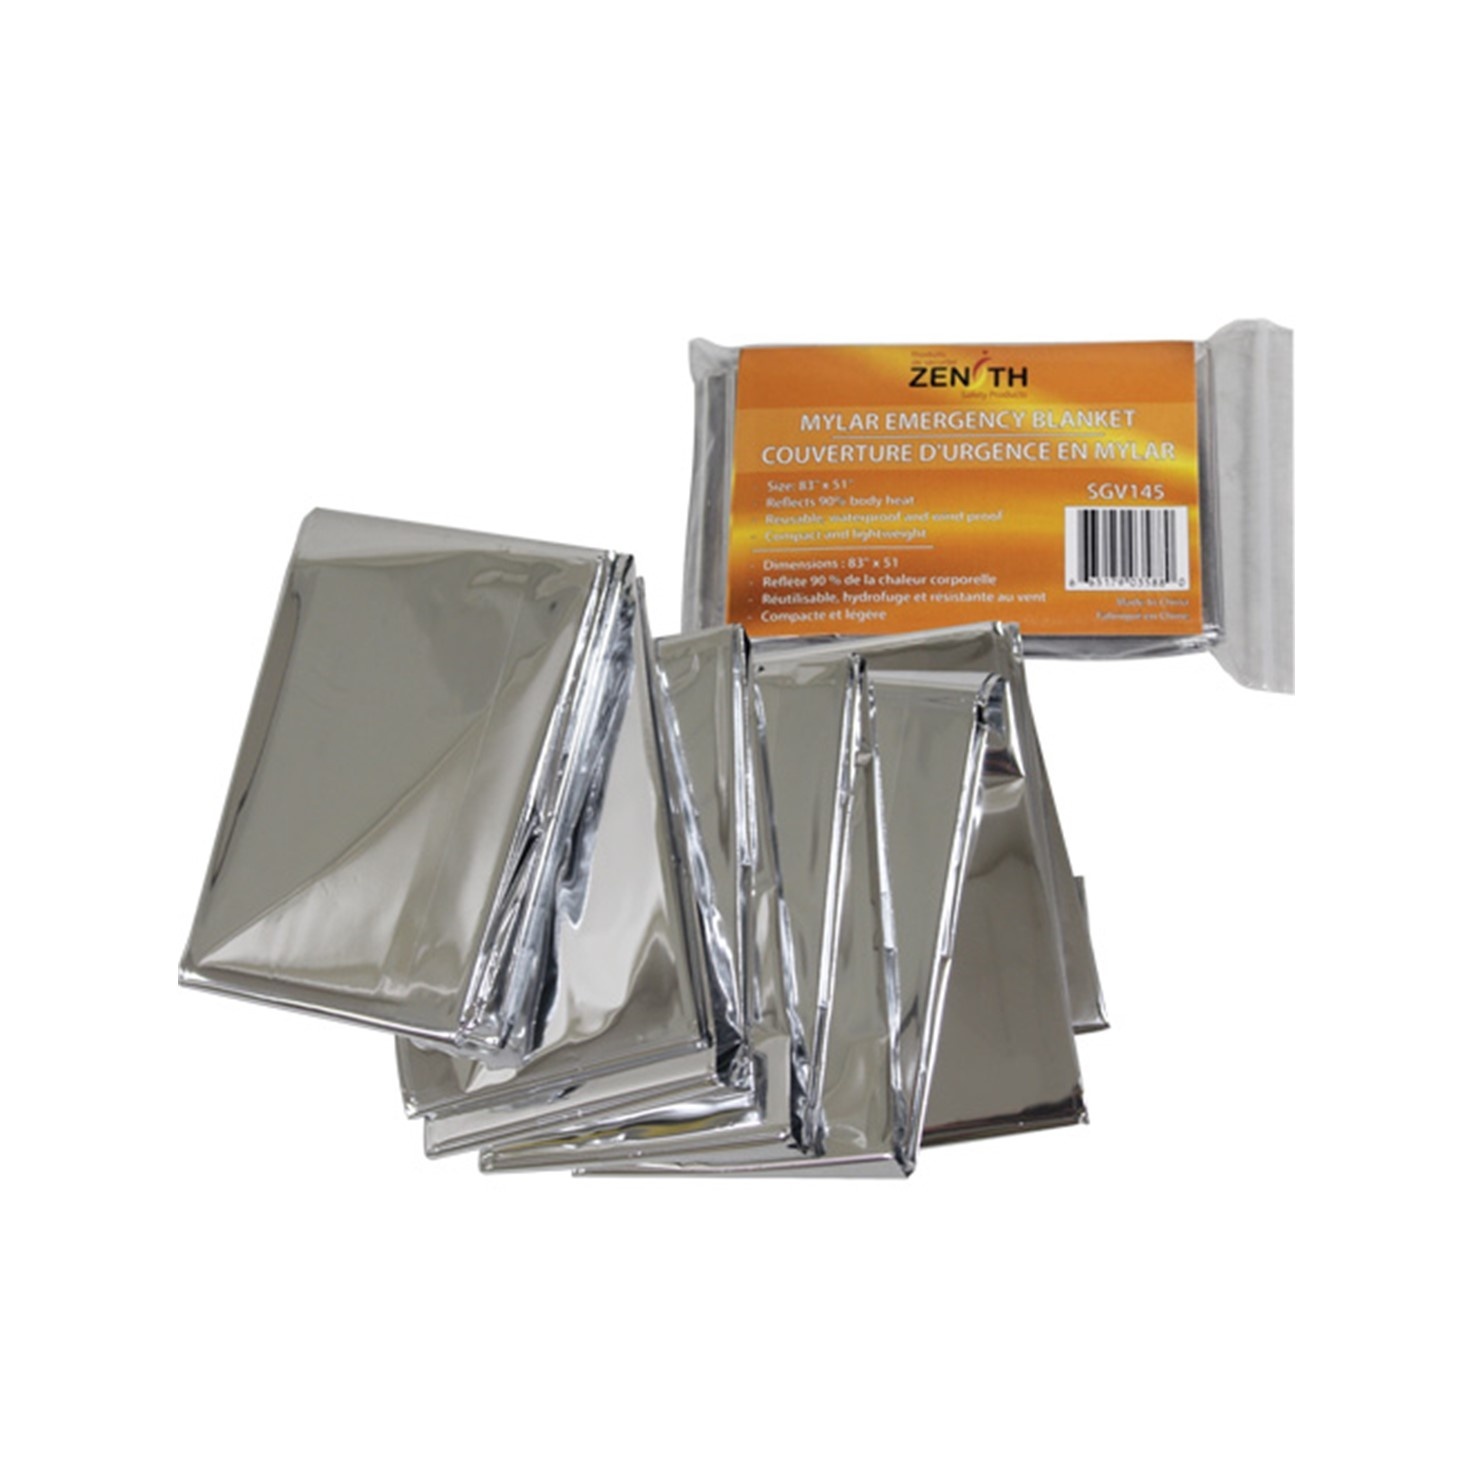 Zenith Safety Products Emergency Blanket